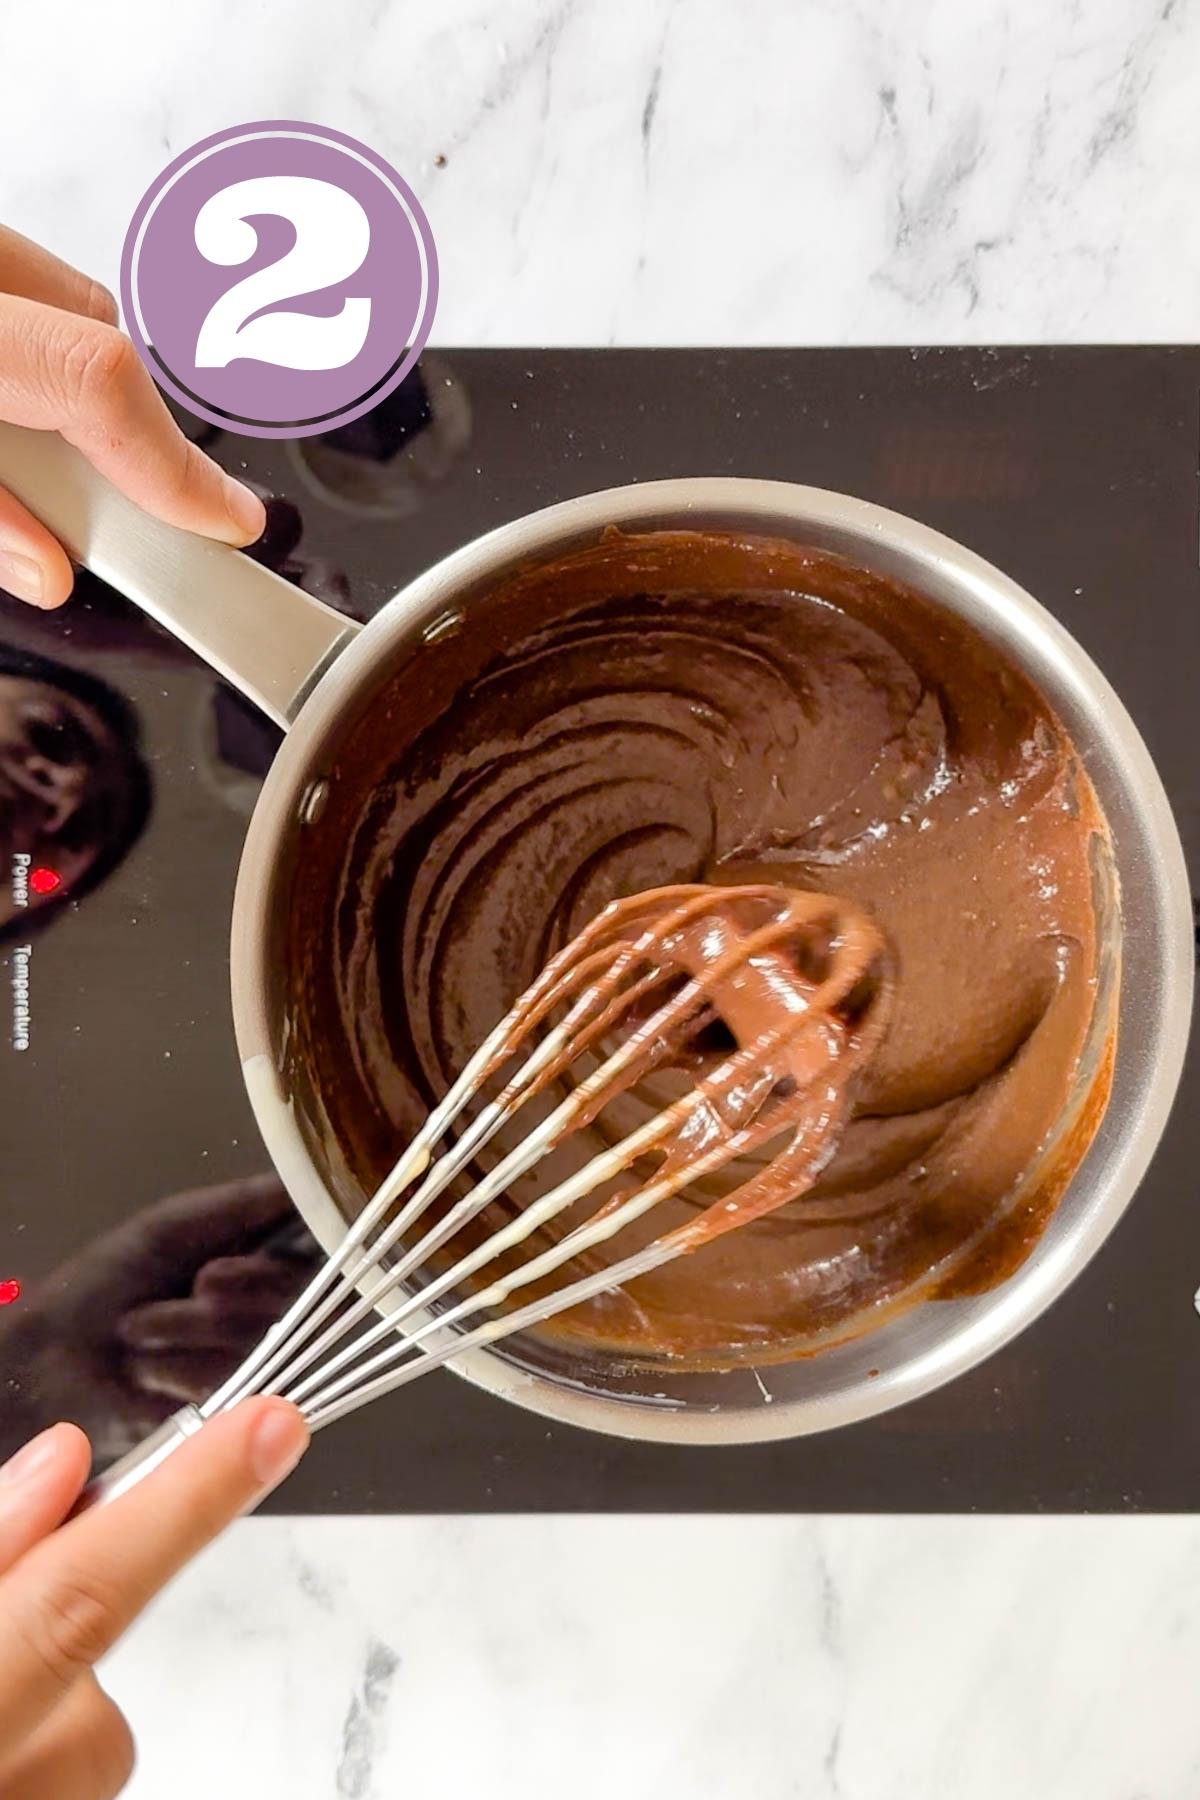 heating the chocolate and butter using a whisk.